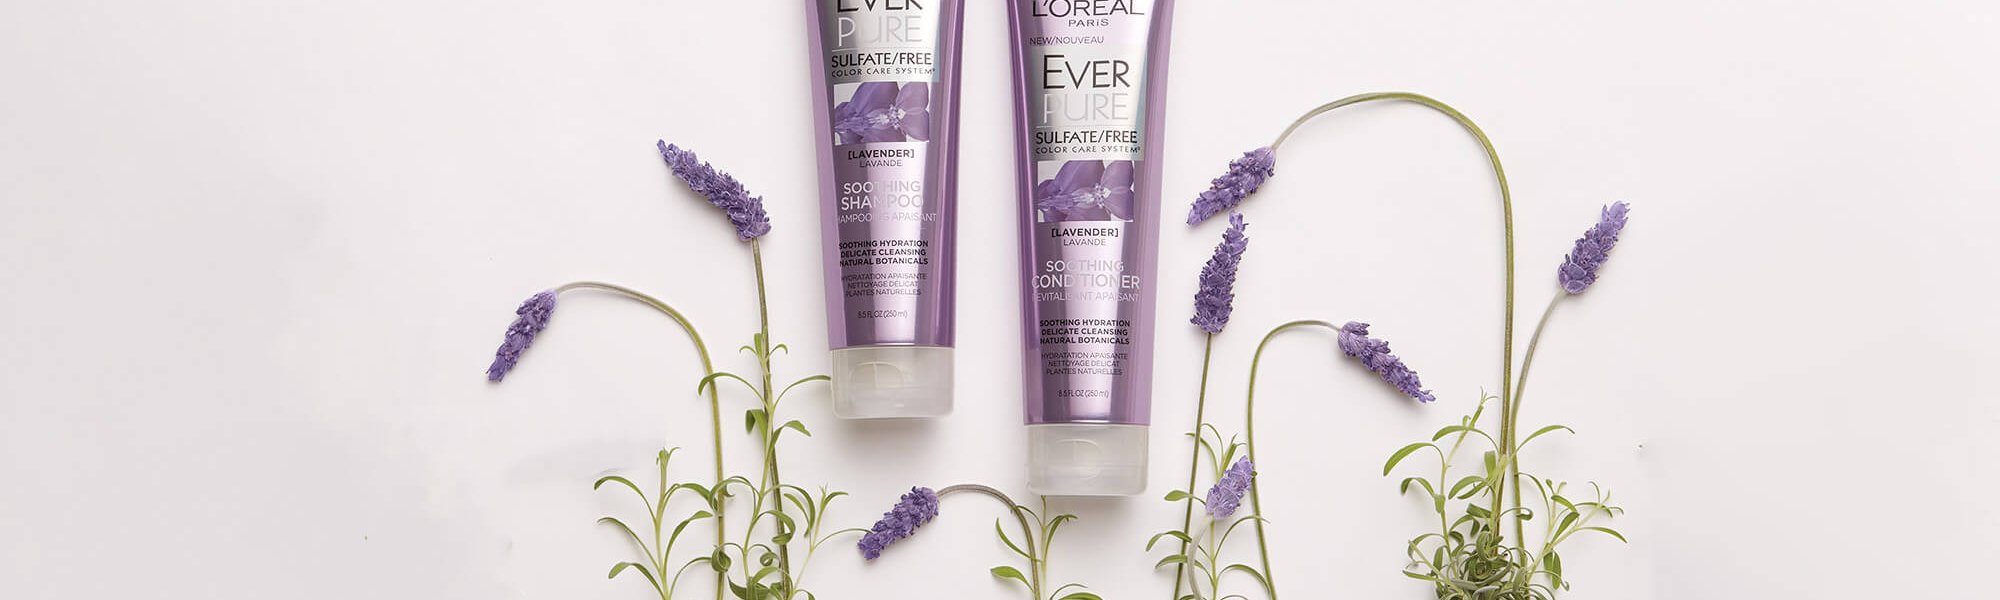 Lavender Oil The One Thing You Should Add To Your Hair Care Routine